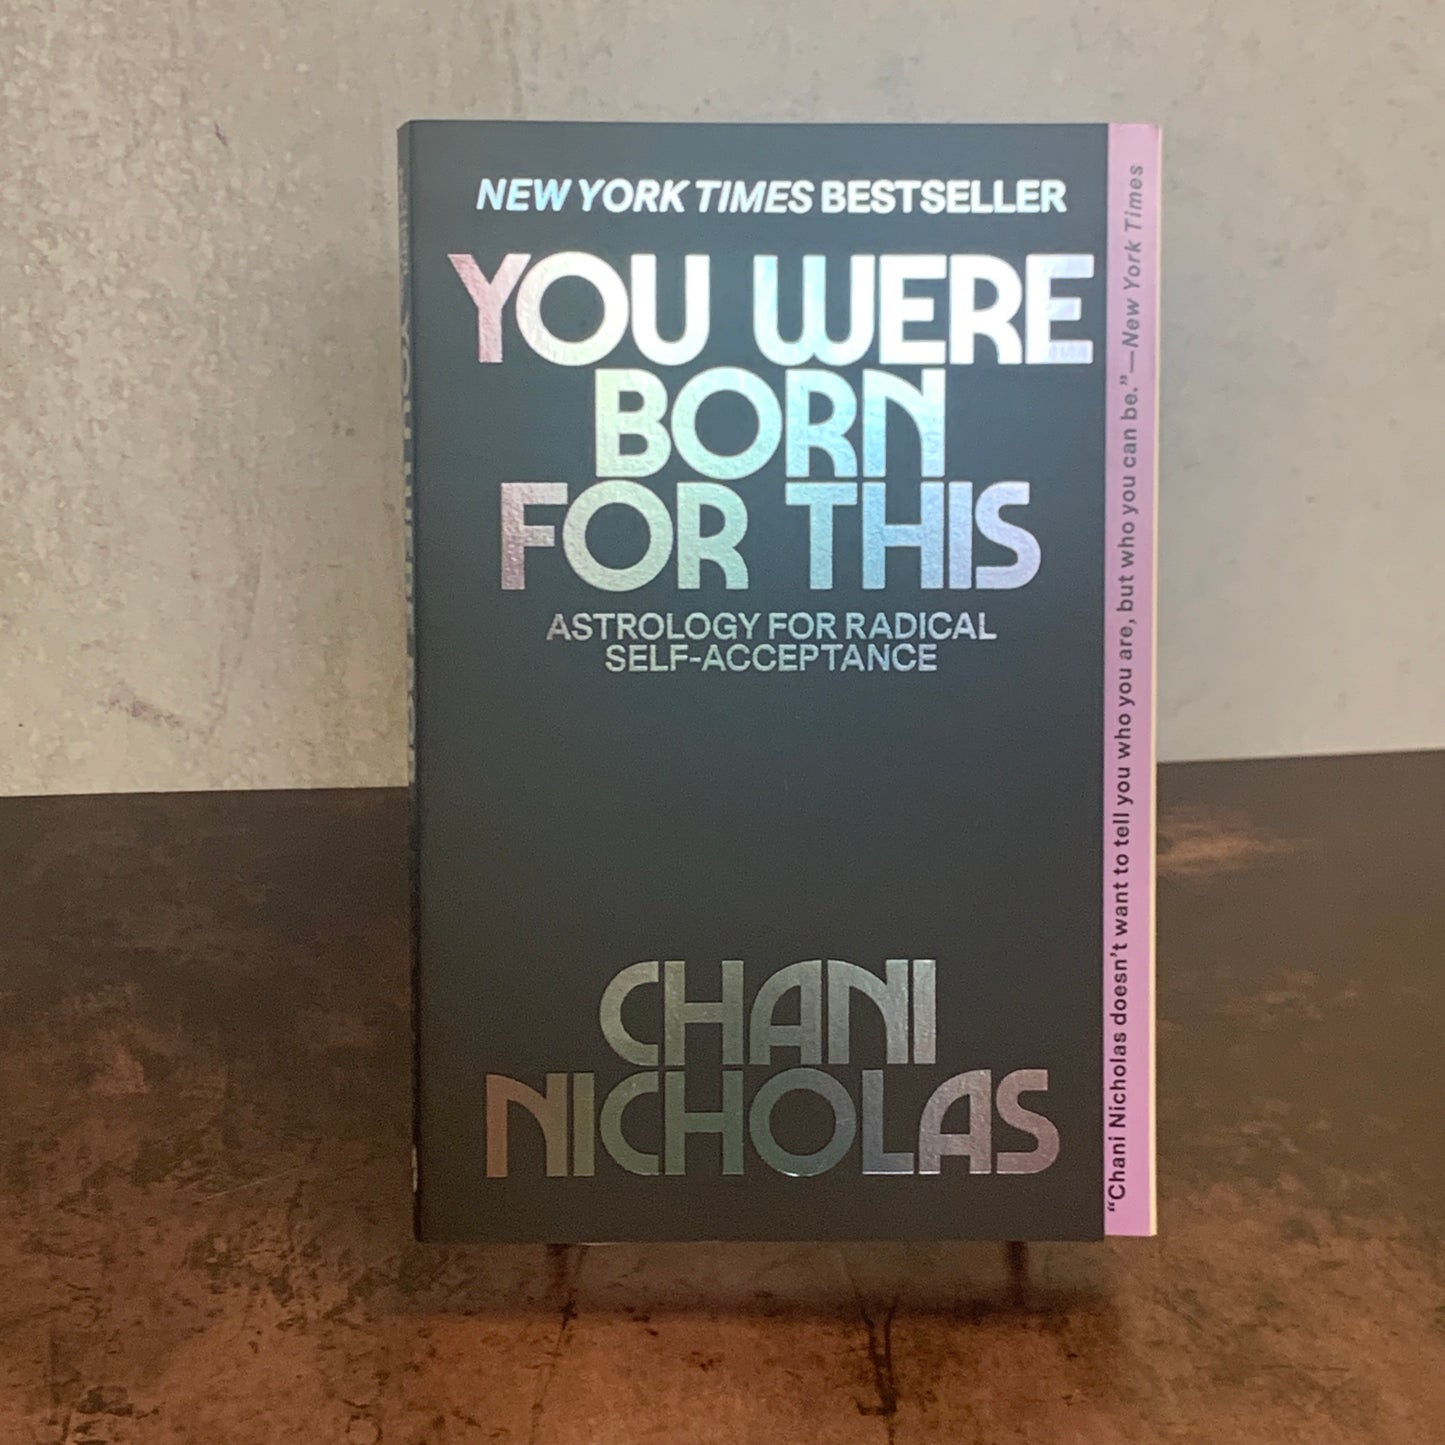 You Were Born For This - Astrology For Radical Self-Acceptance by Chani Nicholas